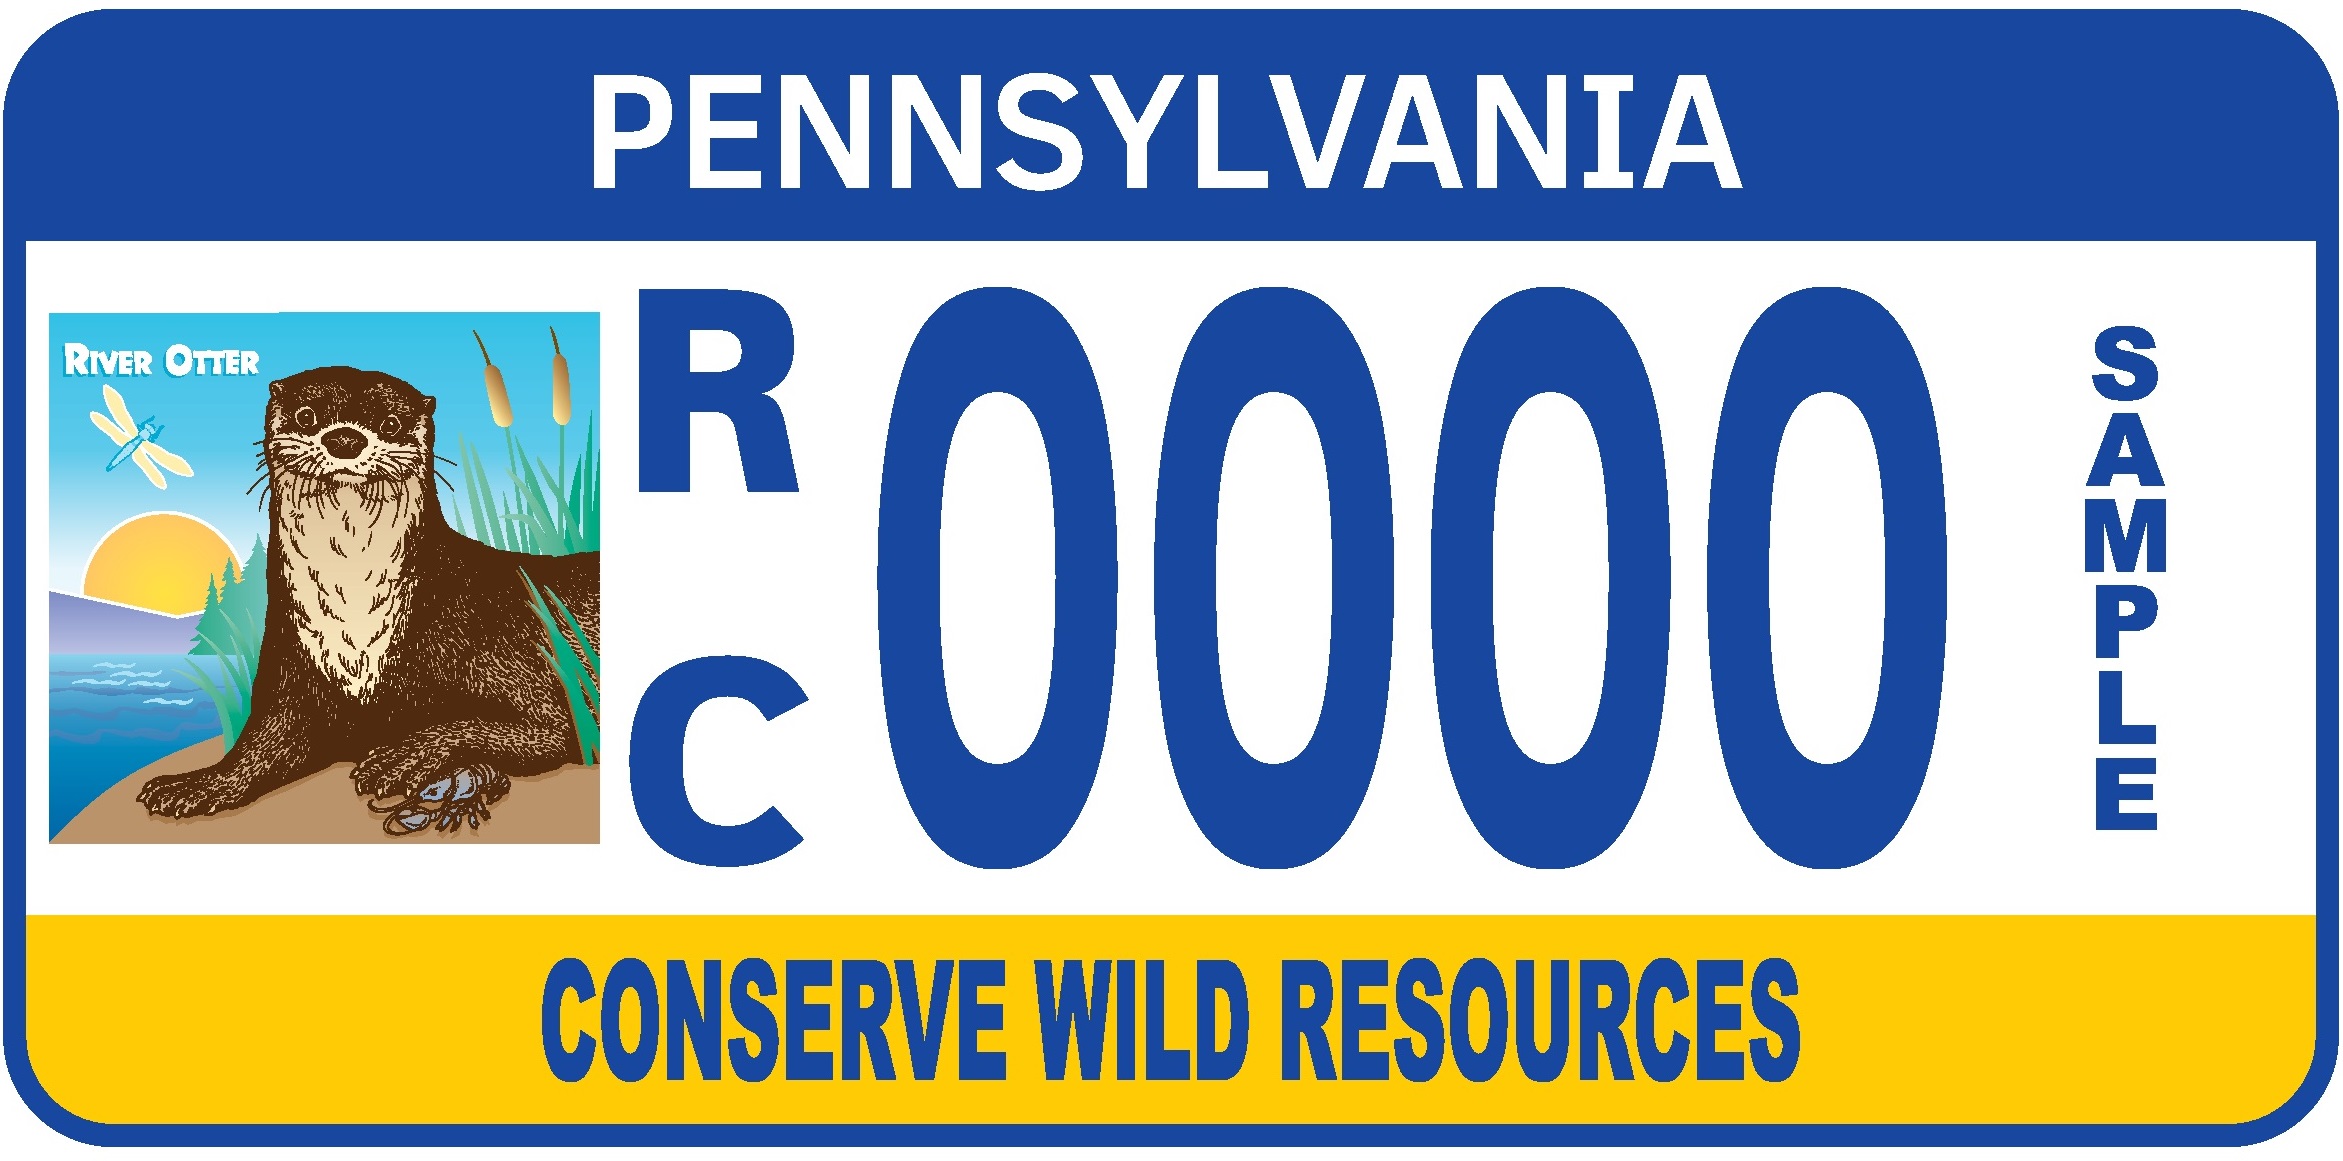 The River Otter License Plate